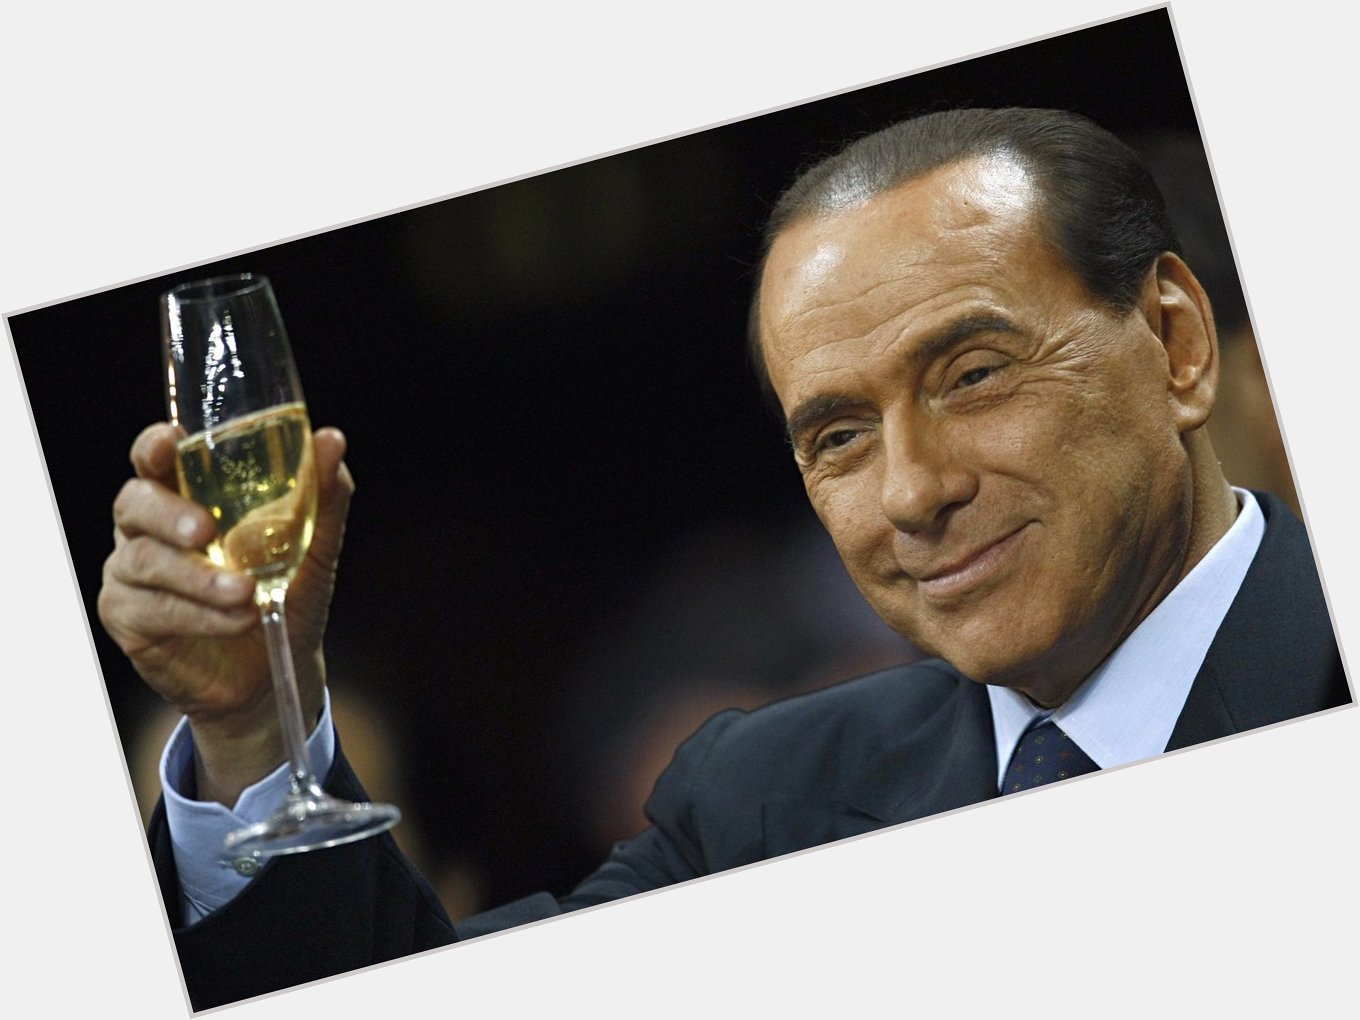 Former Prime Minister of Italy Silvio Berlusconi turns 81. Let\s wish him a happy birthday  